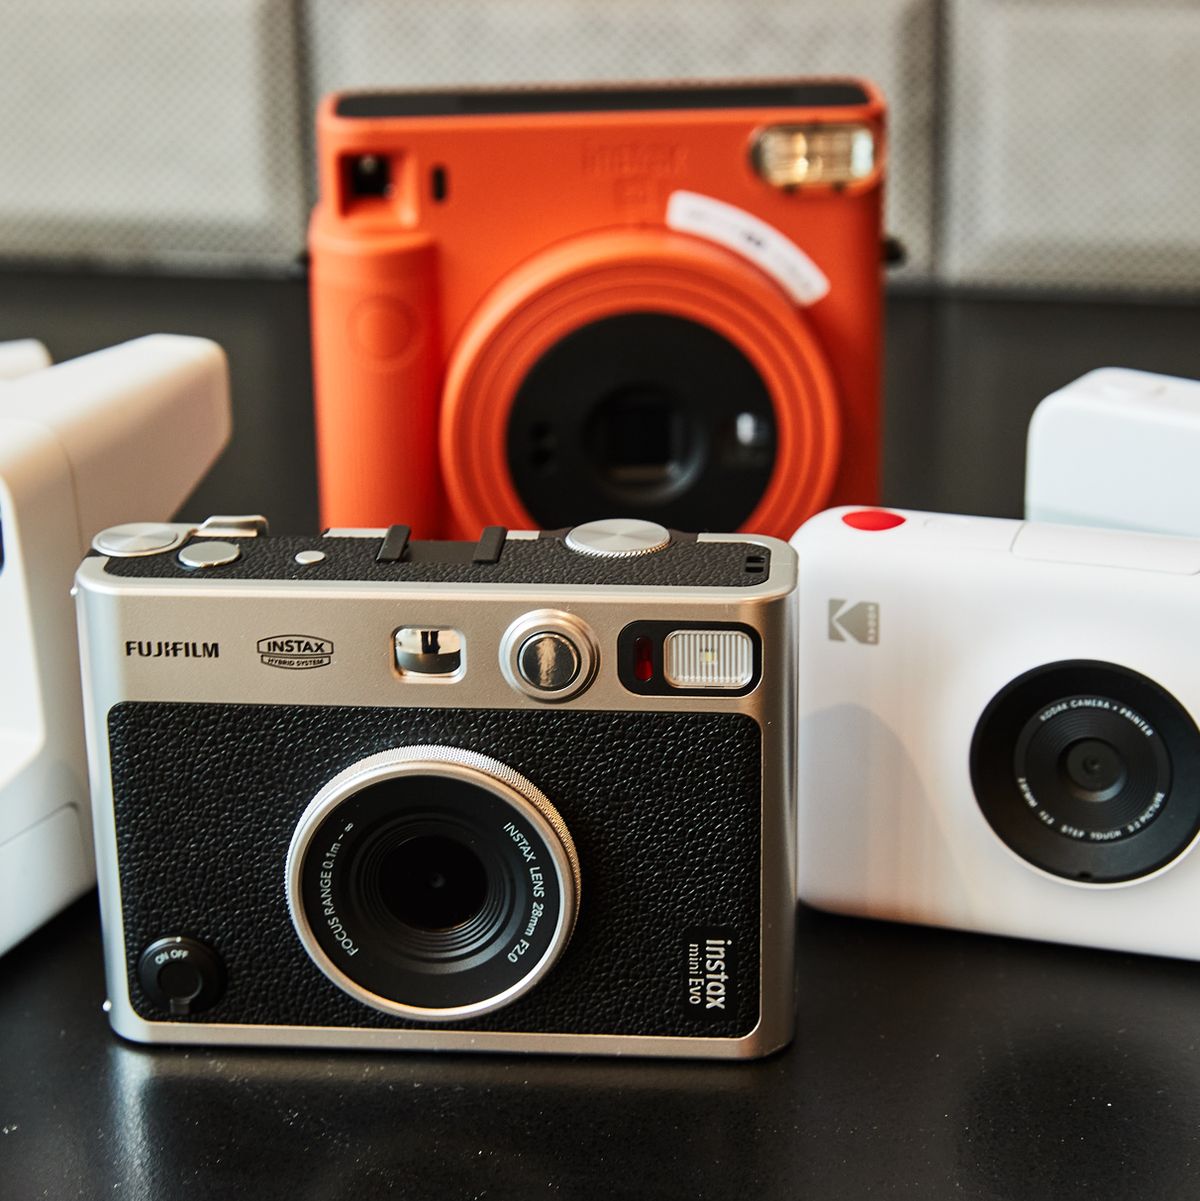 Fujifilm Instax Mini LiPlay Review: A Cam and Printer In One